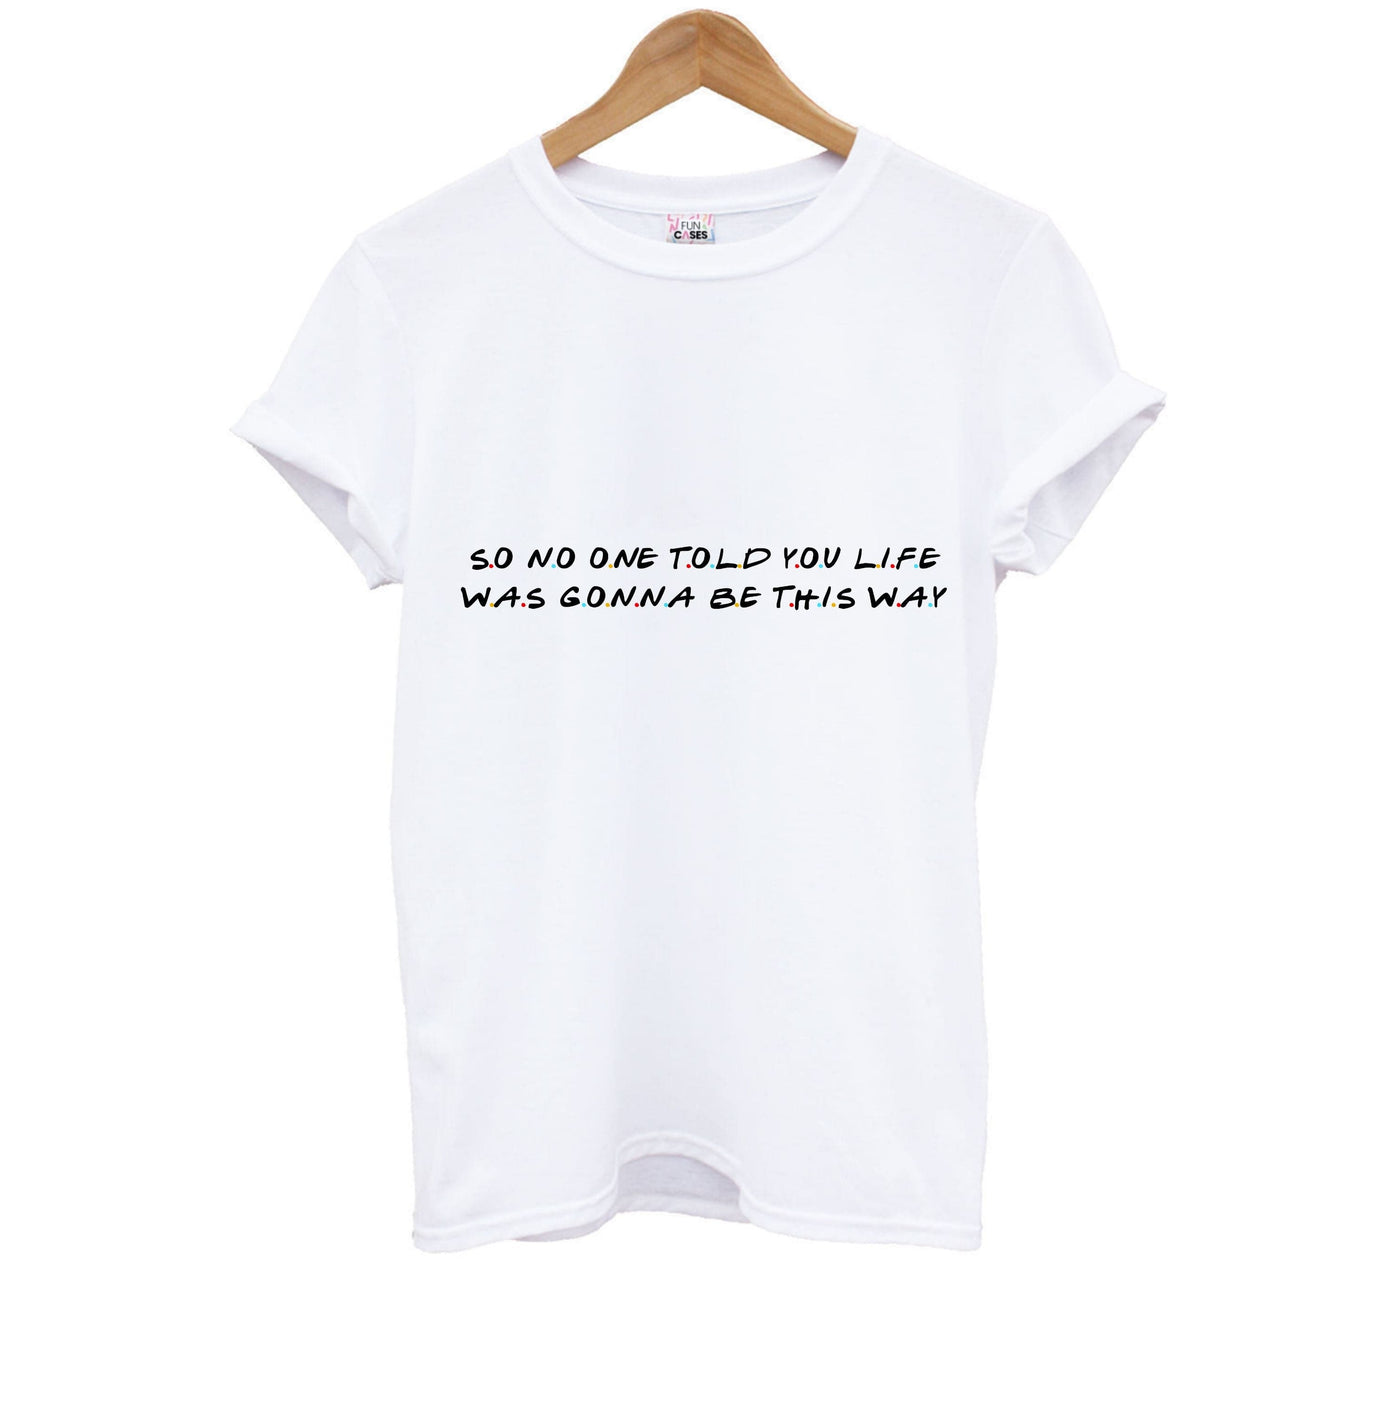 So No One Told You Life - Friends Kids T-Shirt